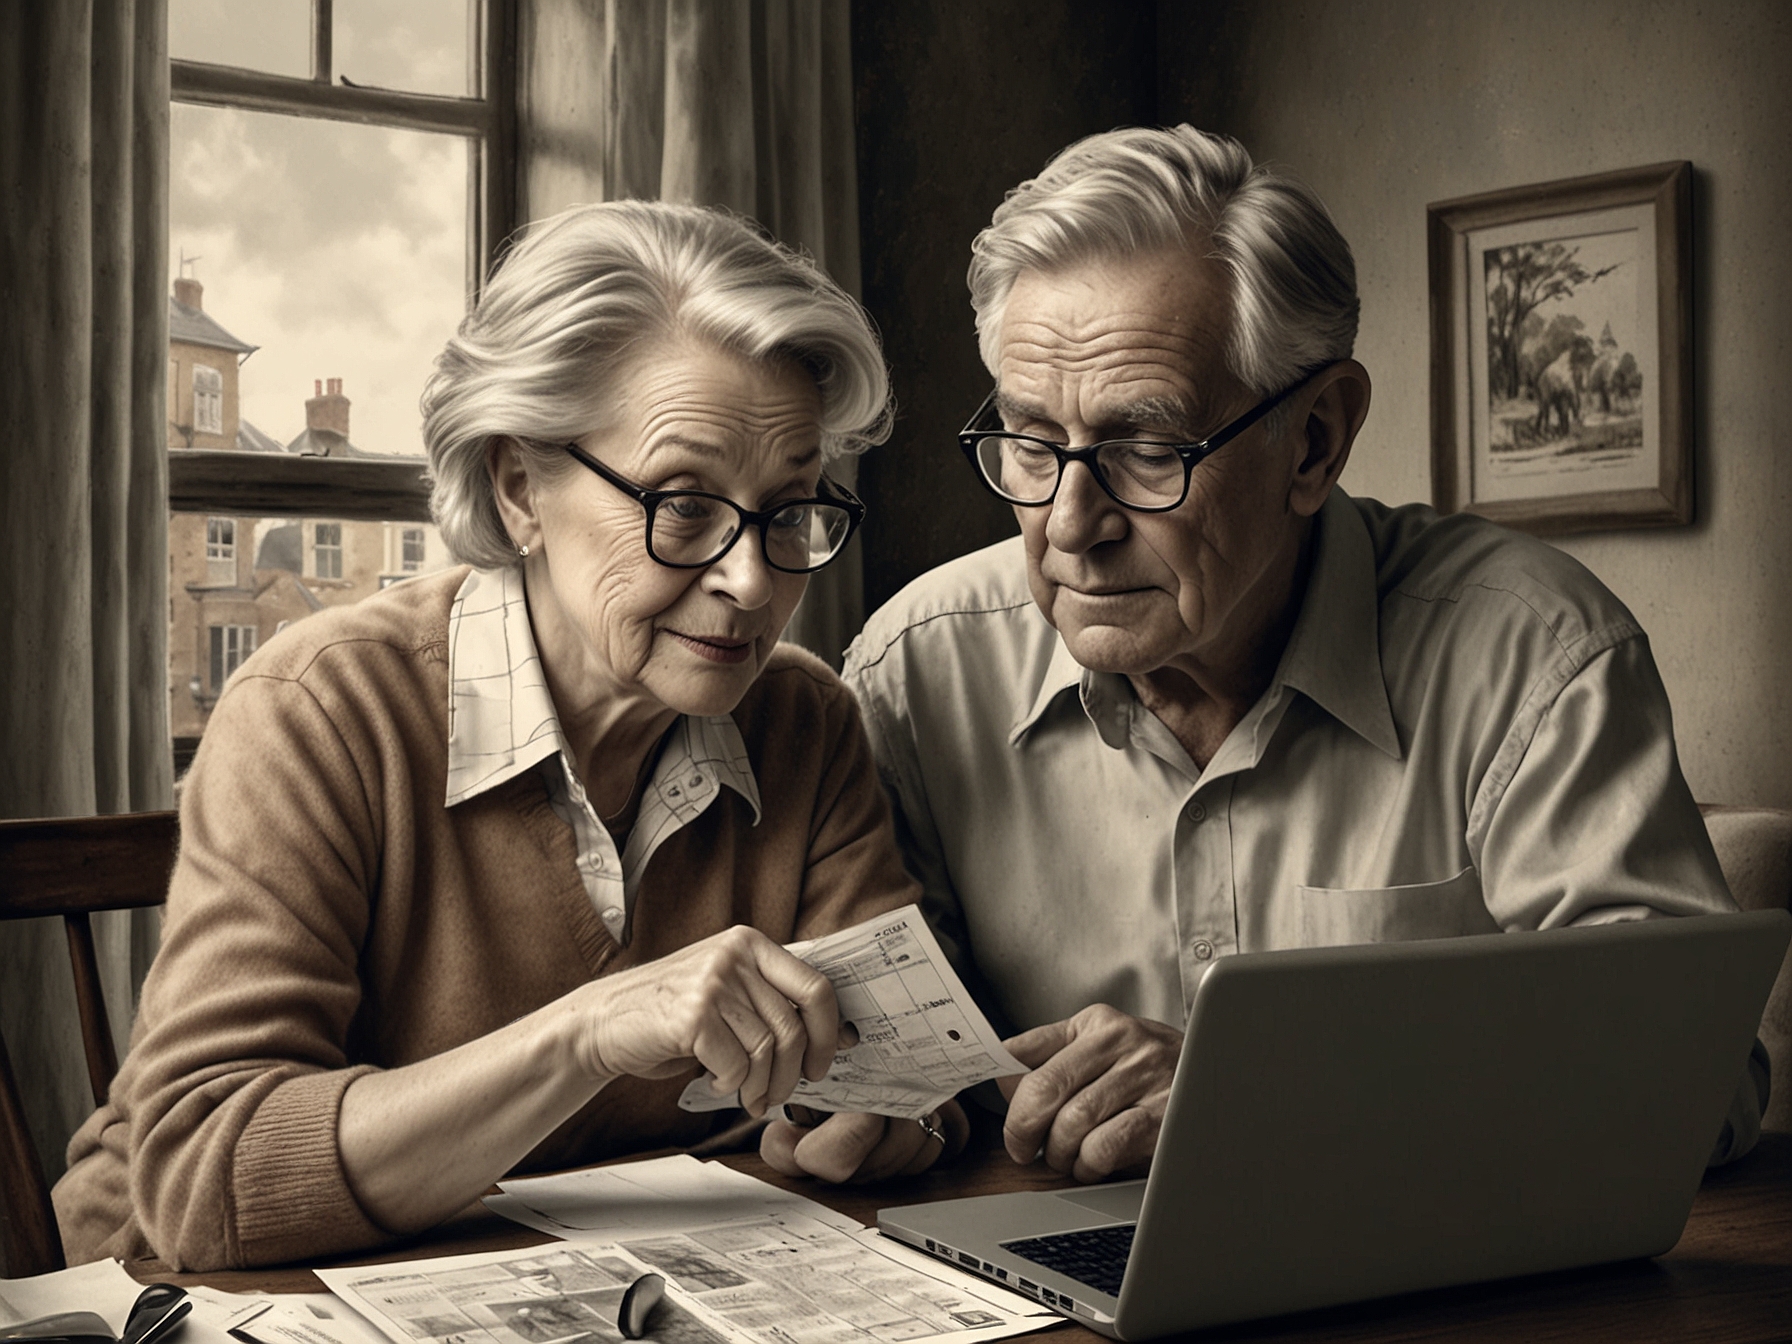 An image of a senior couple reviewing their savings statements on a laptop, symbolizing the appeal of Cash Isas for retirees seeking secure and accessible tax-efficient savings options.